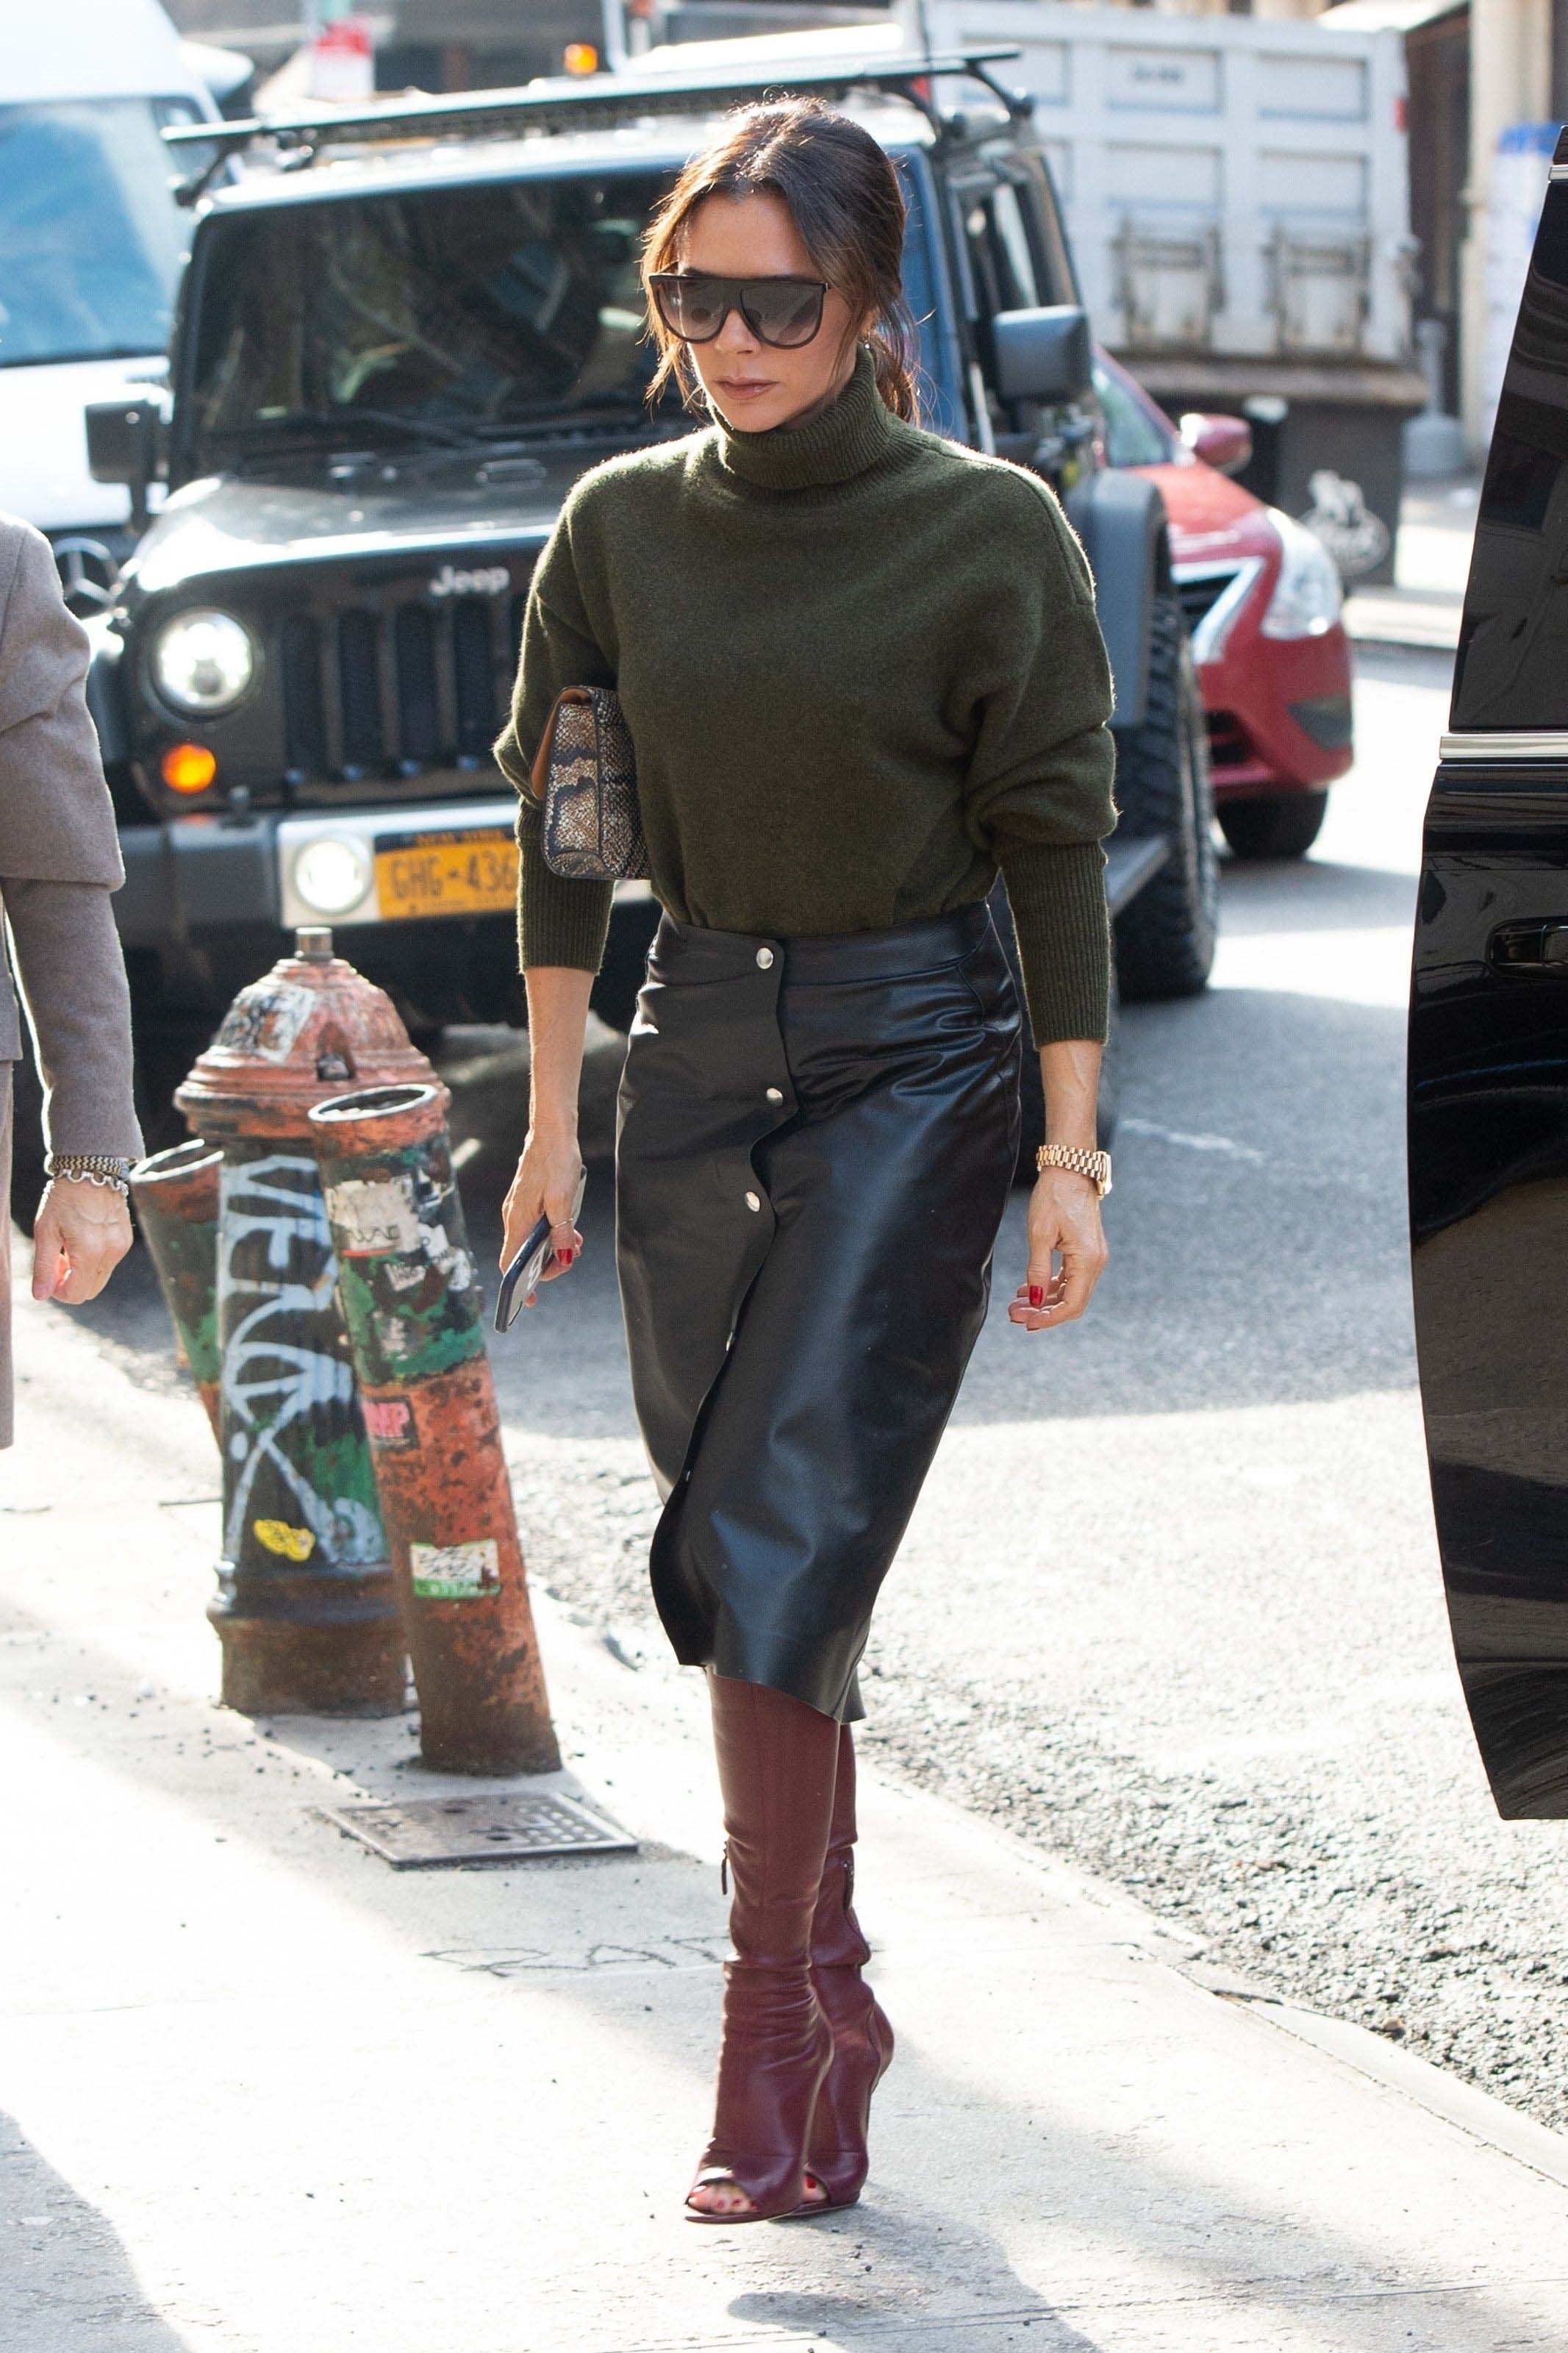 Victoria Beckham goes shopping with her son Brooklyn after lunch